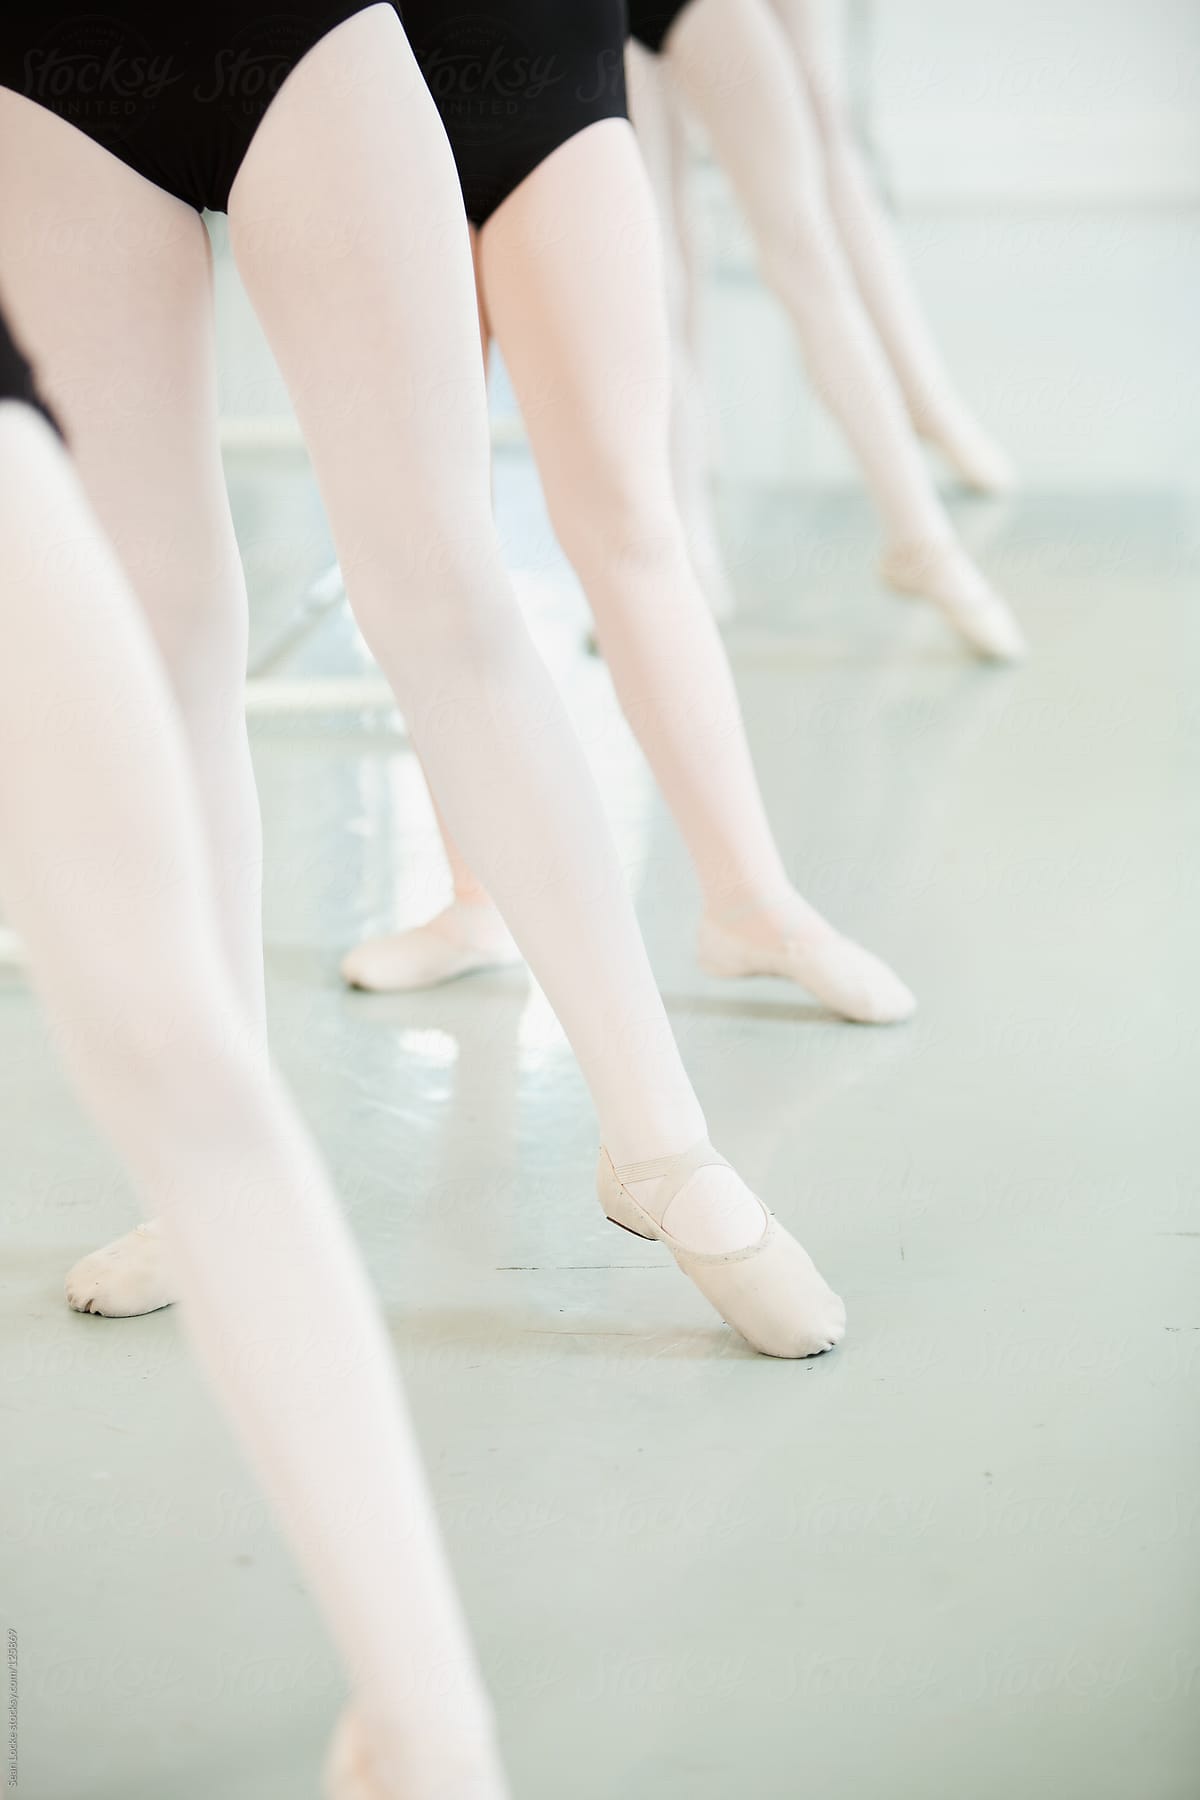 Ballet: Students Practice Pointing Toes